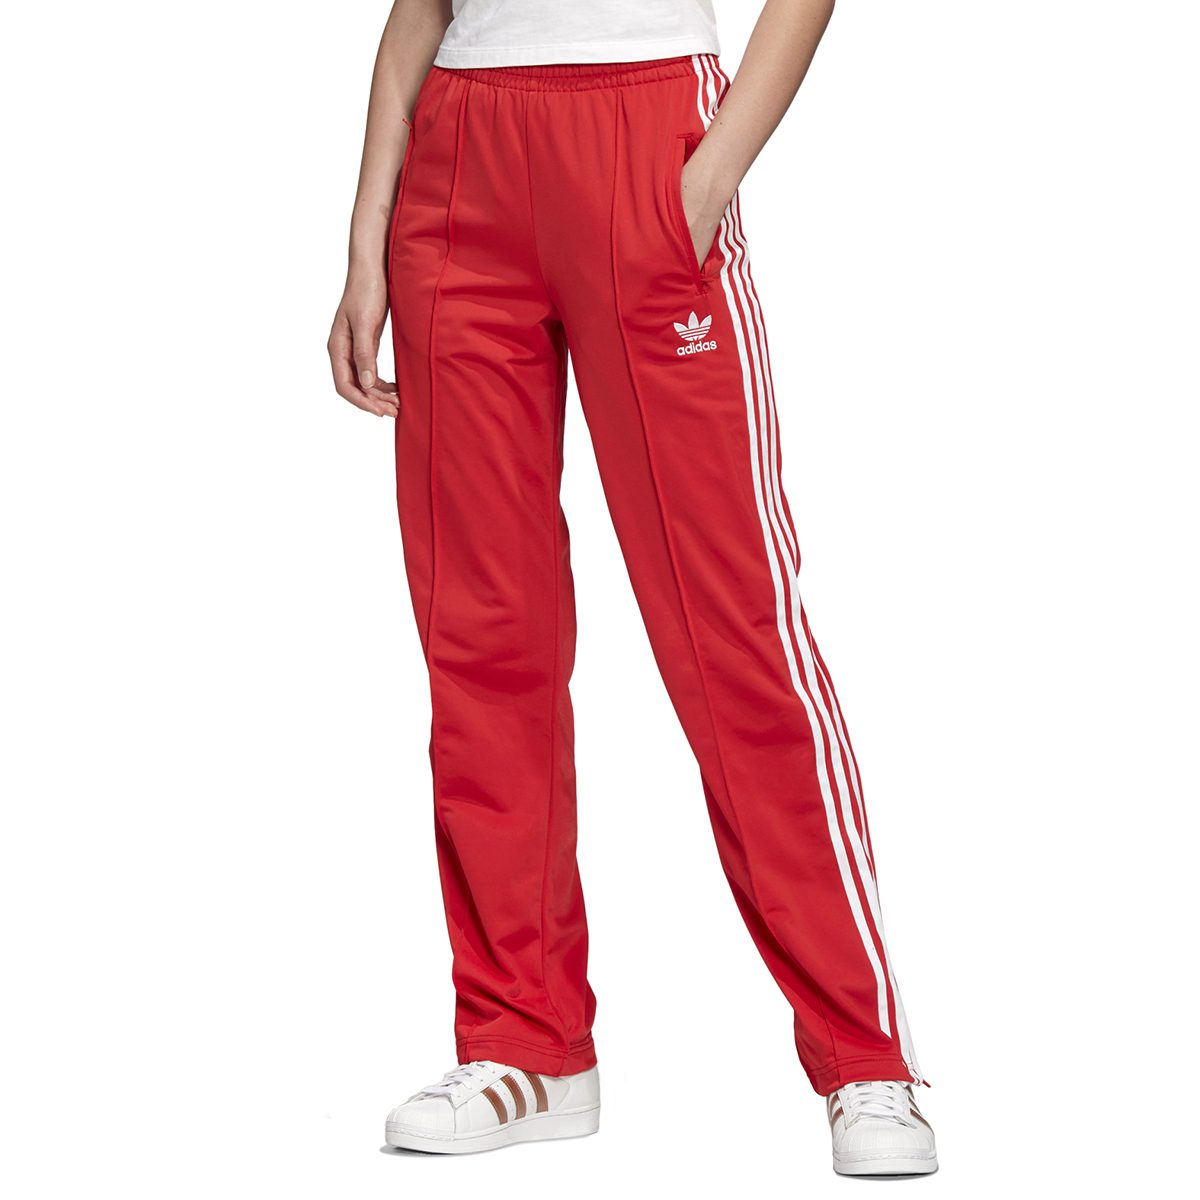 red and white adidas womens